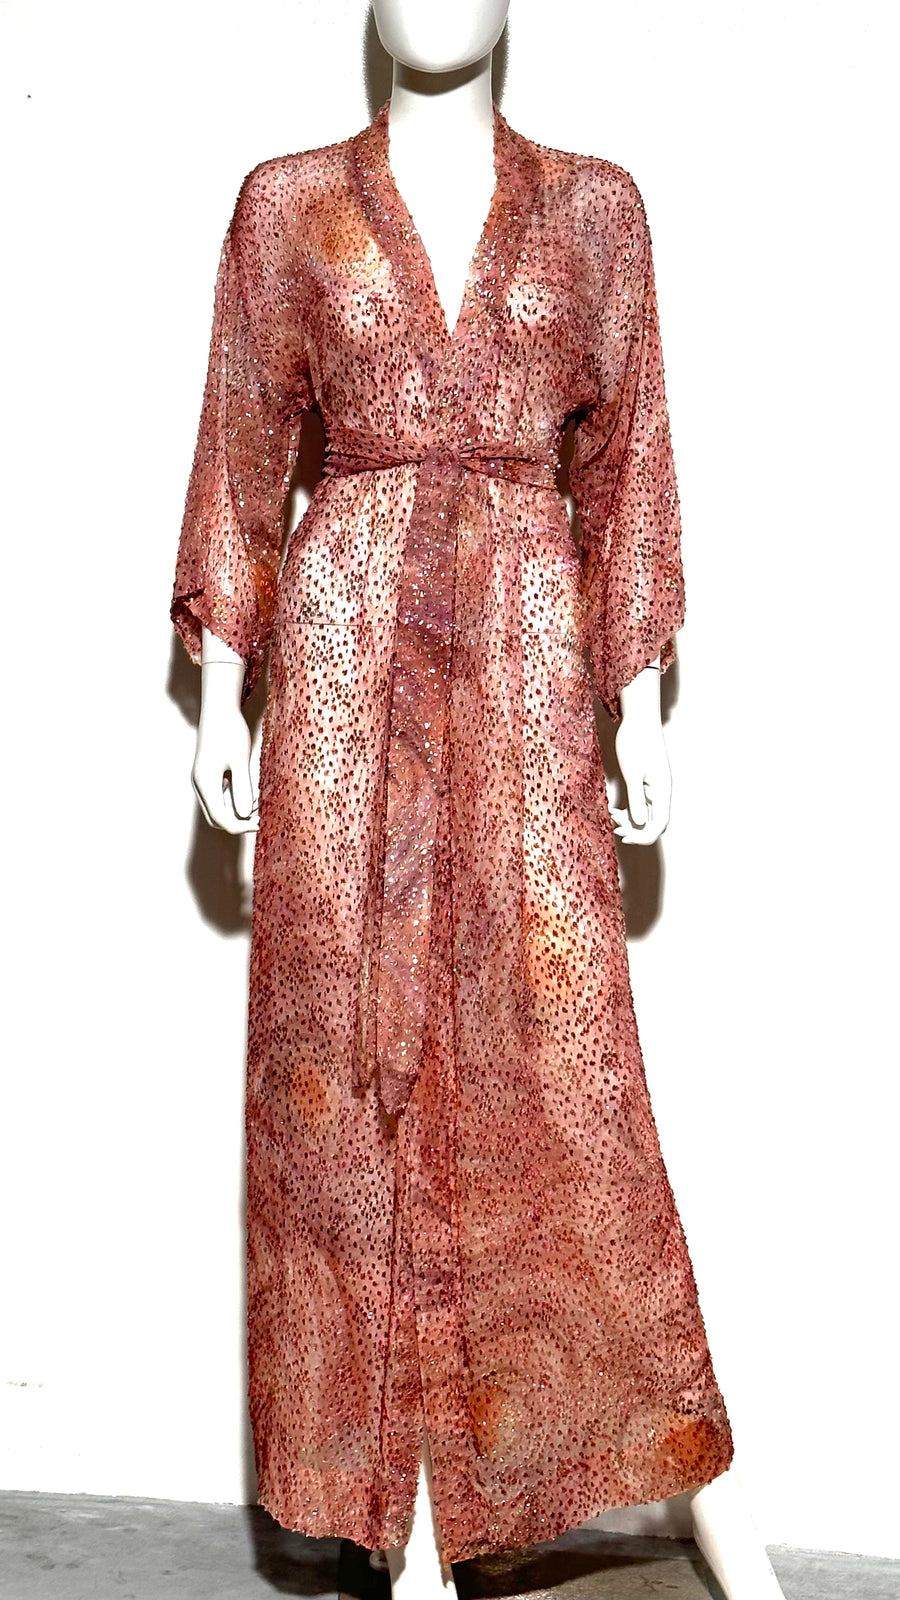 Petals by Eleanor Coppola and Marjorie Bowers Robe